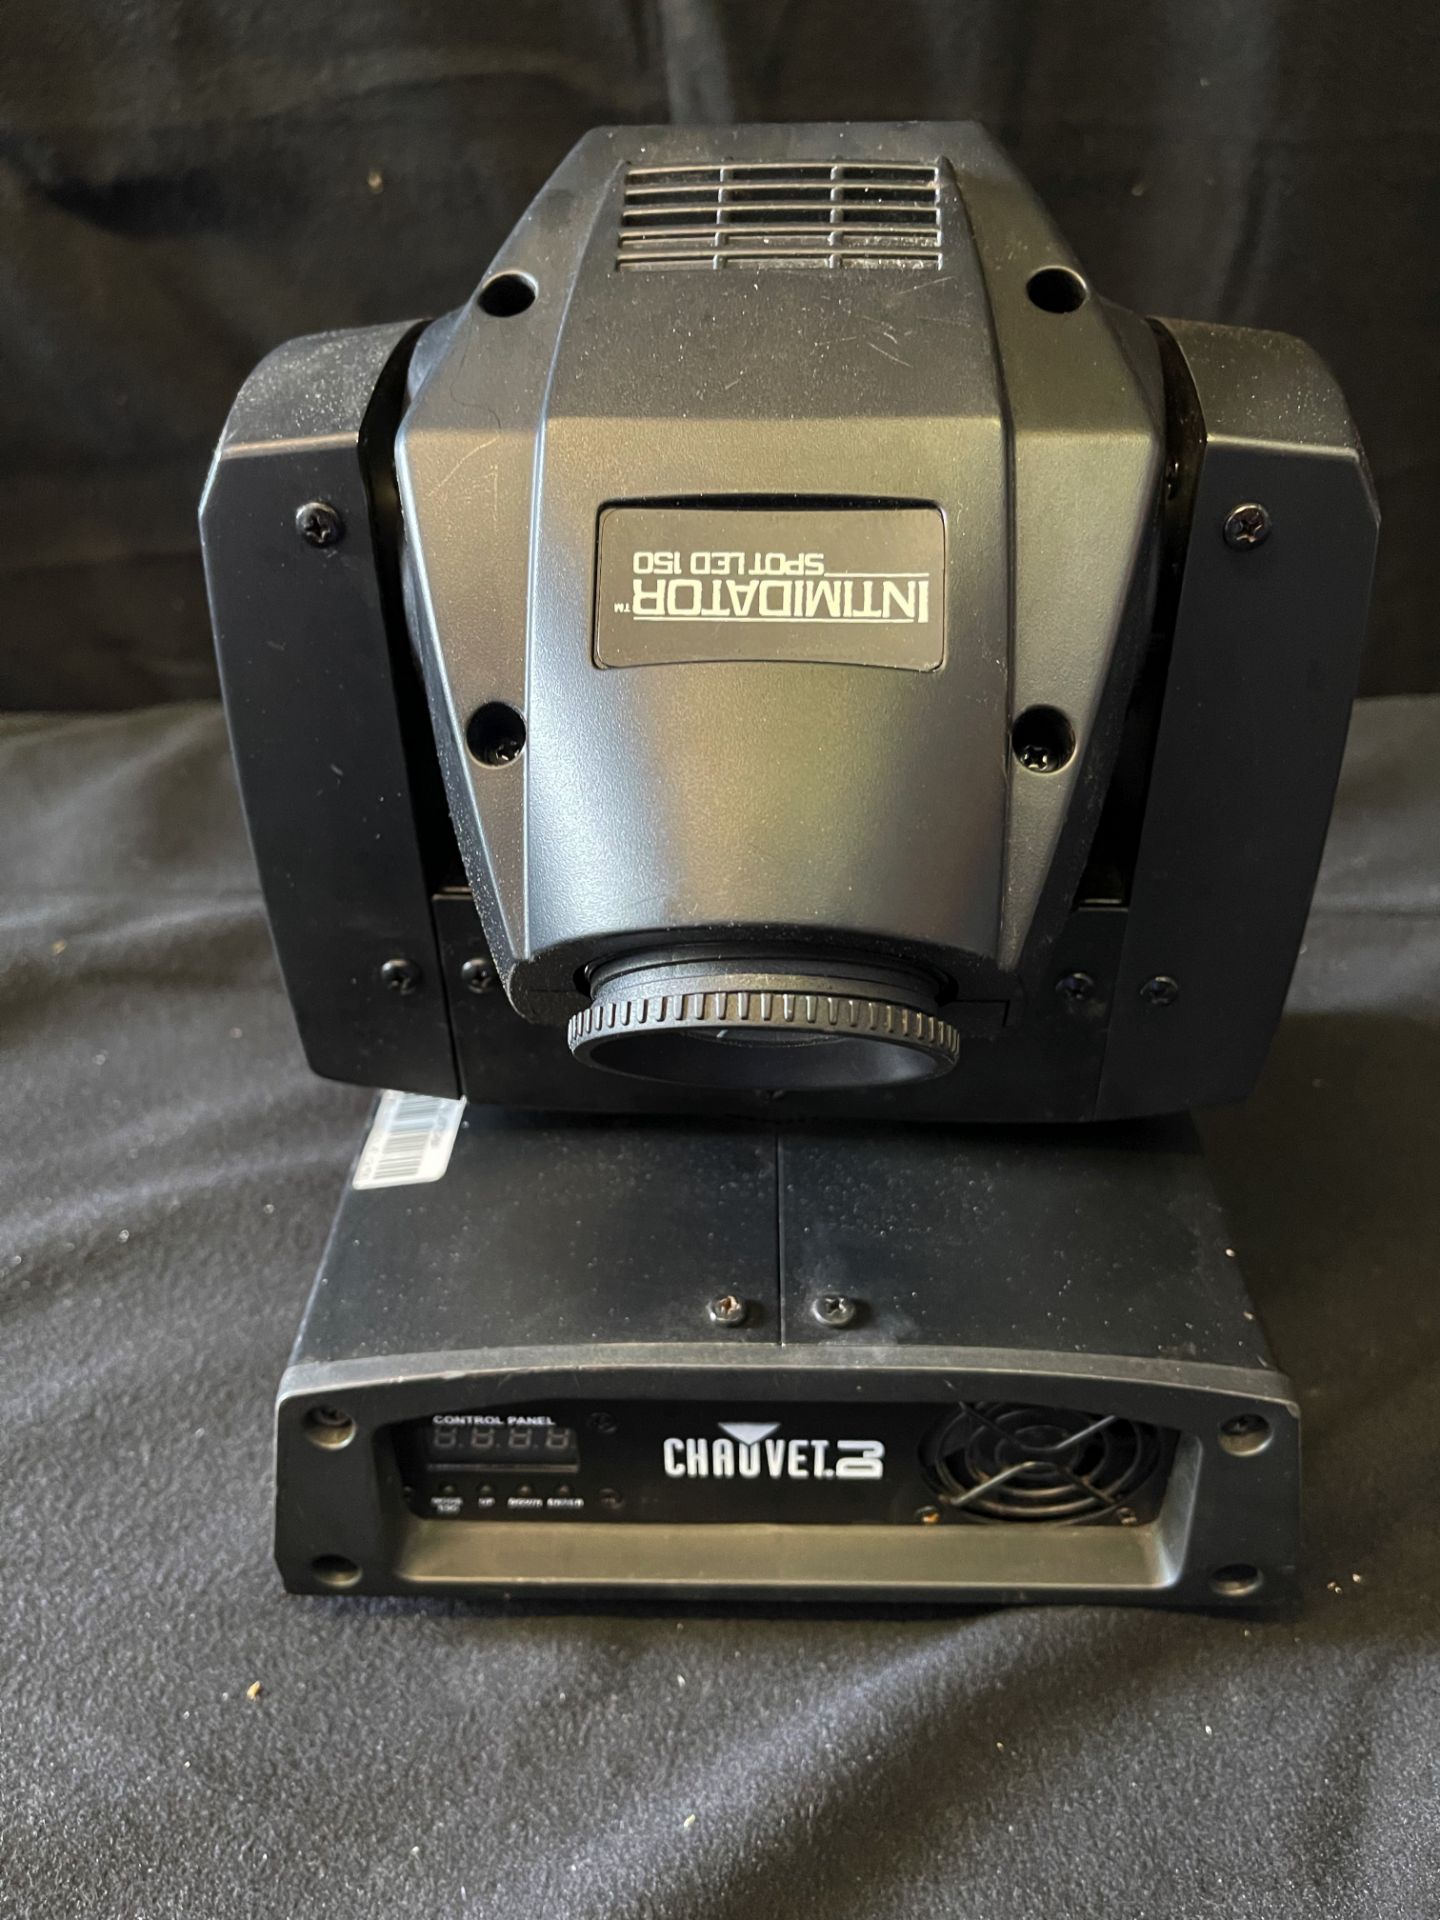 A Chauvet Intimidator 150 Moving Head Light, good condition, tested and working.